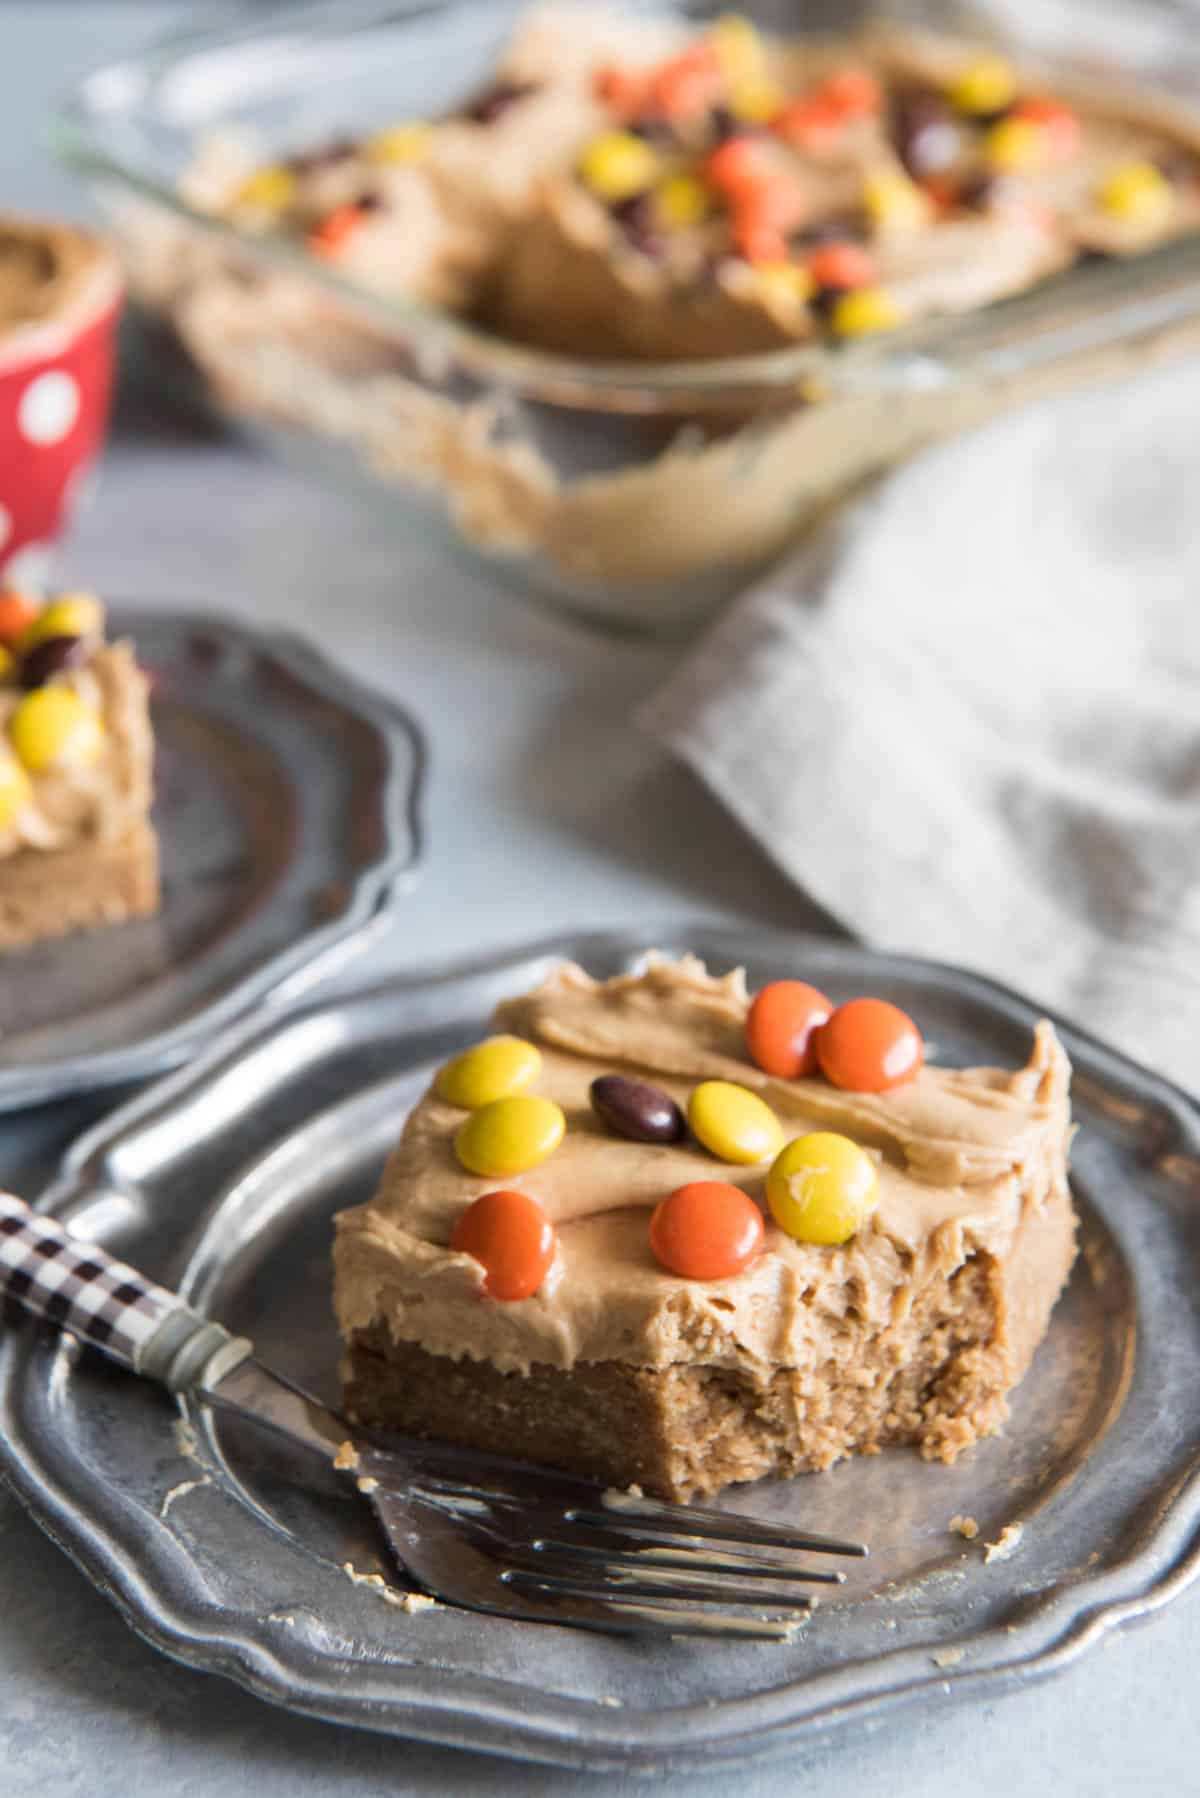 A peanut butter blondie on a plate with a fork.